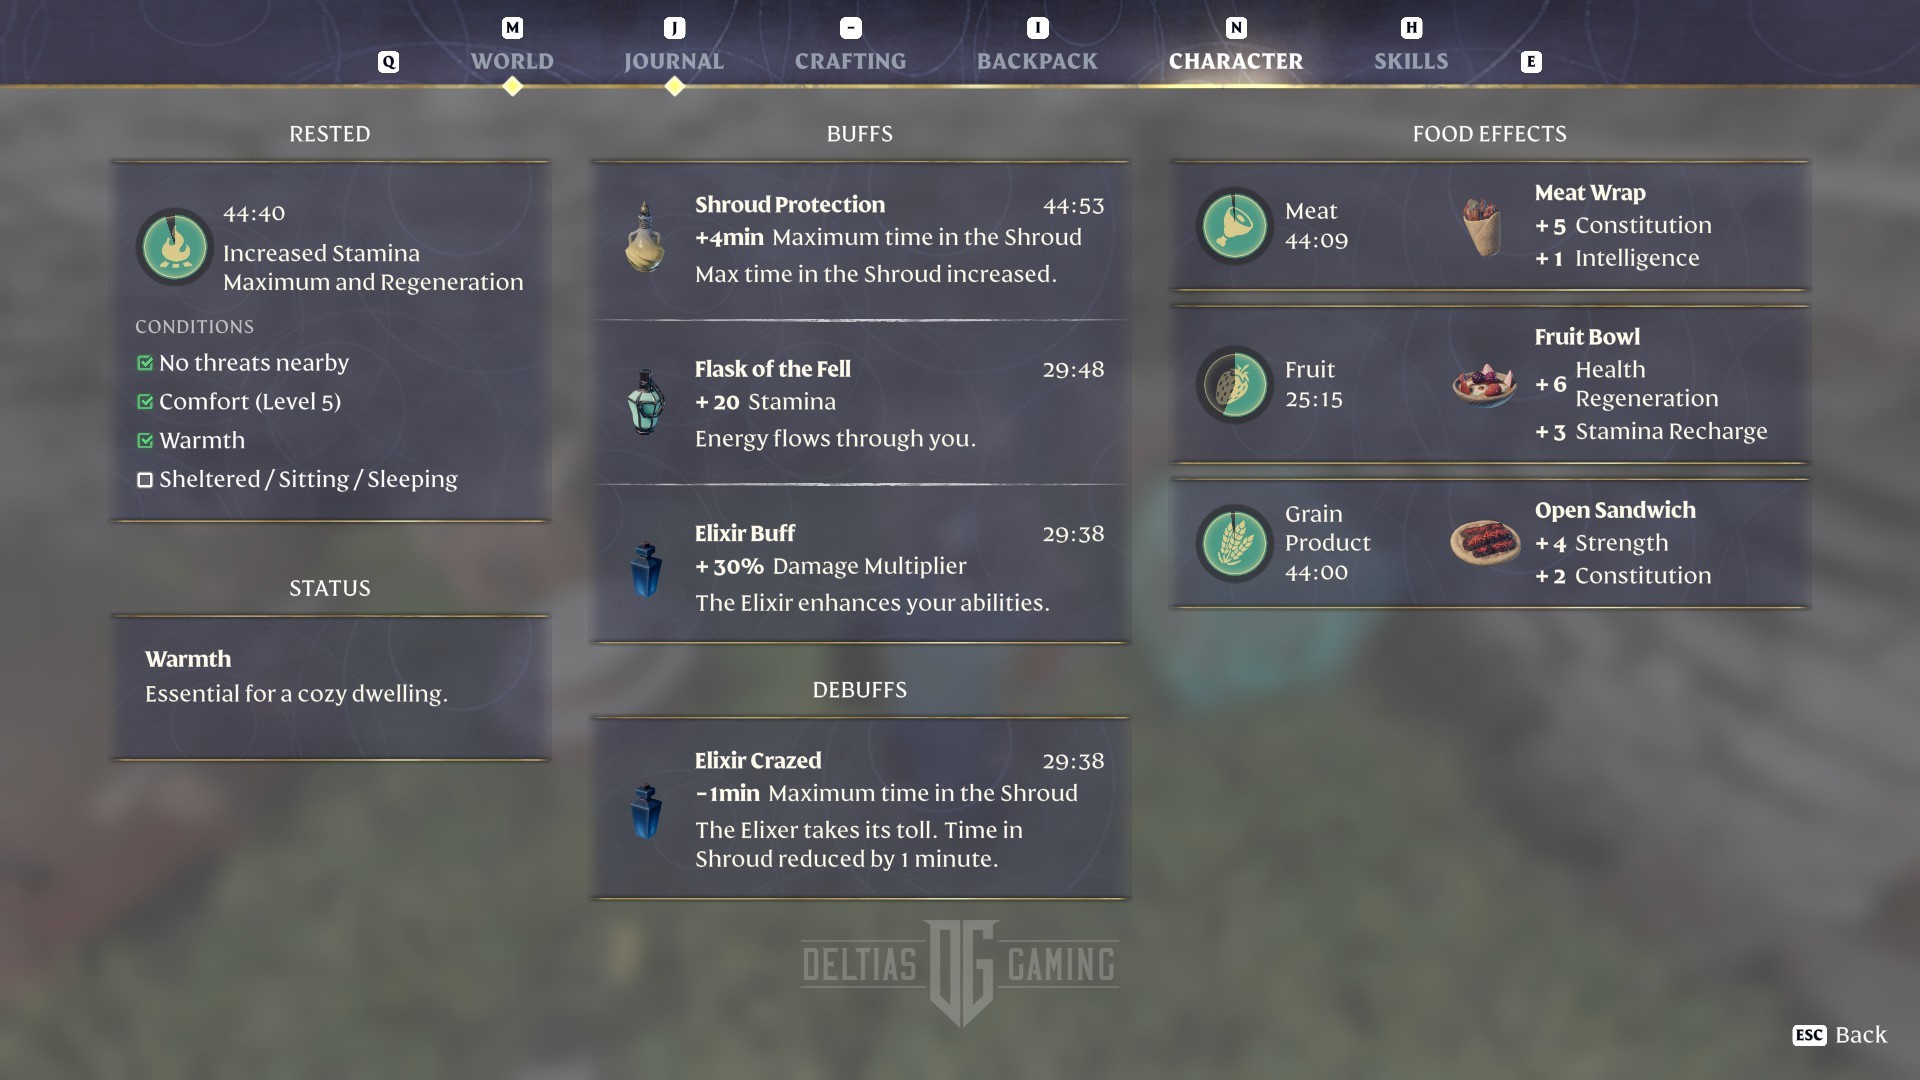 Warrior Consumables and Food for Enshrouded Game